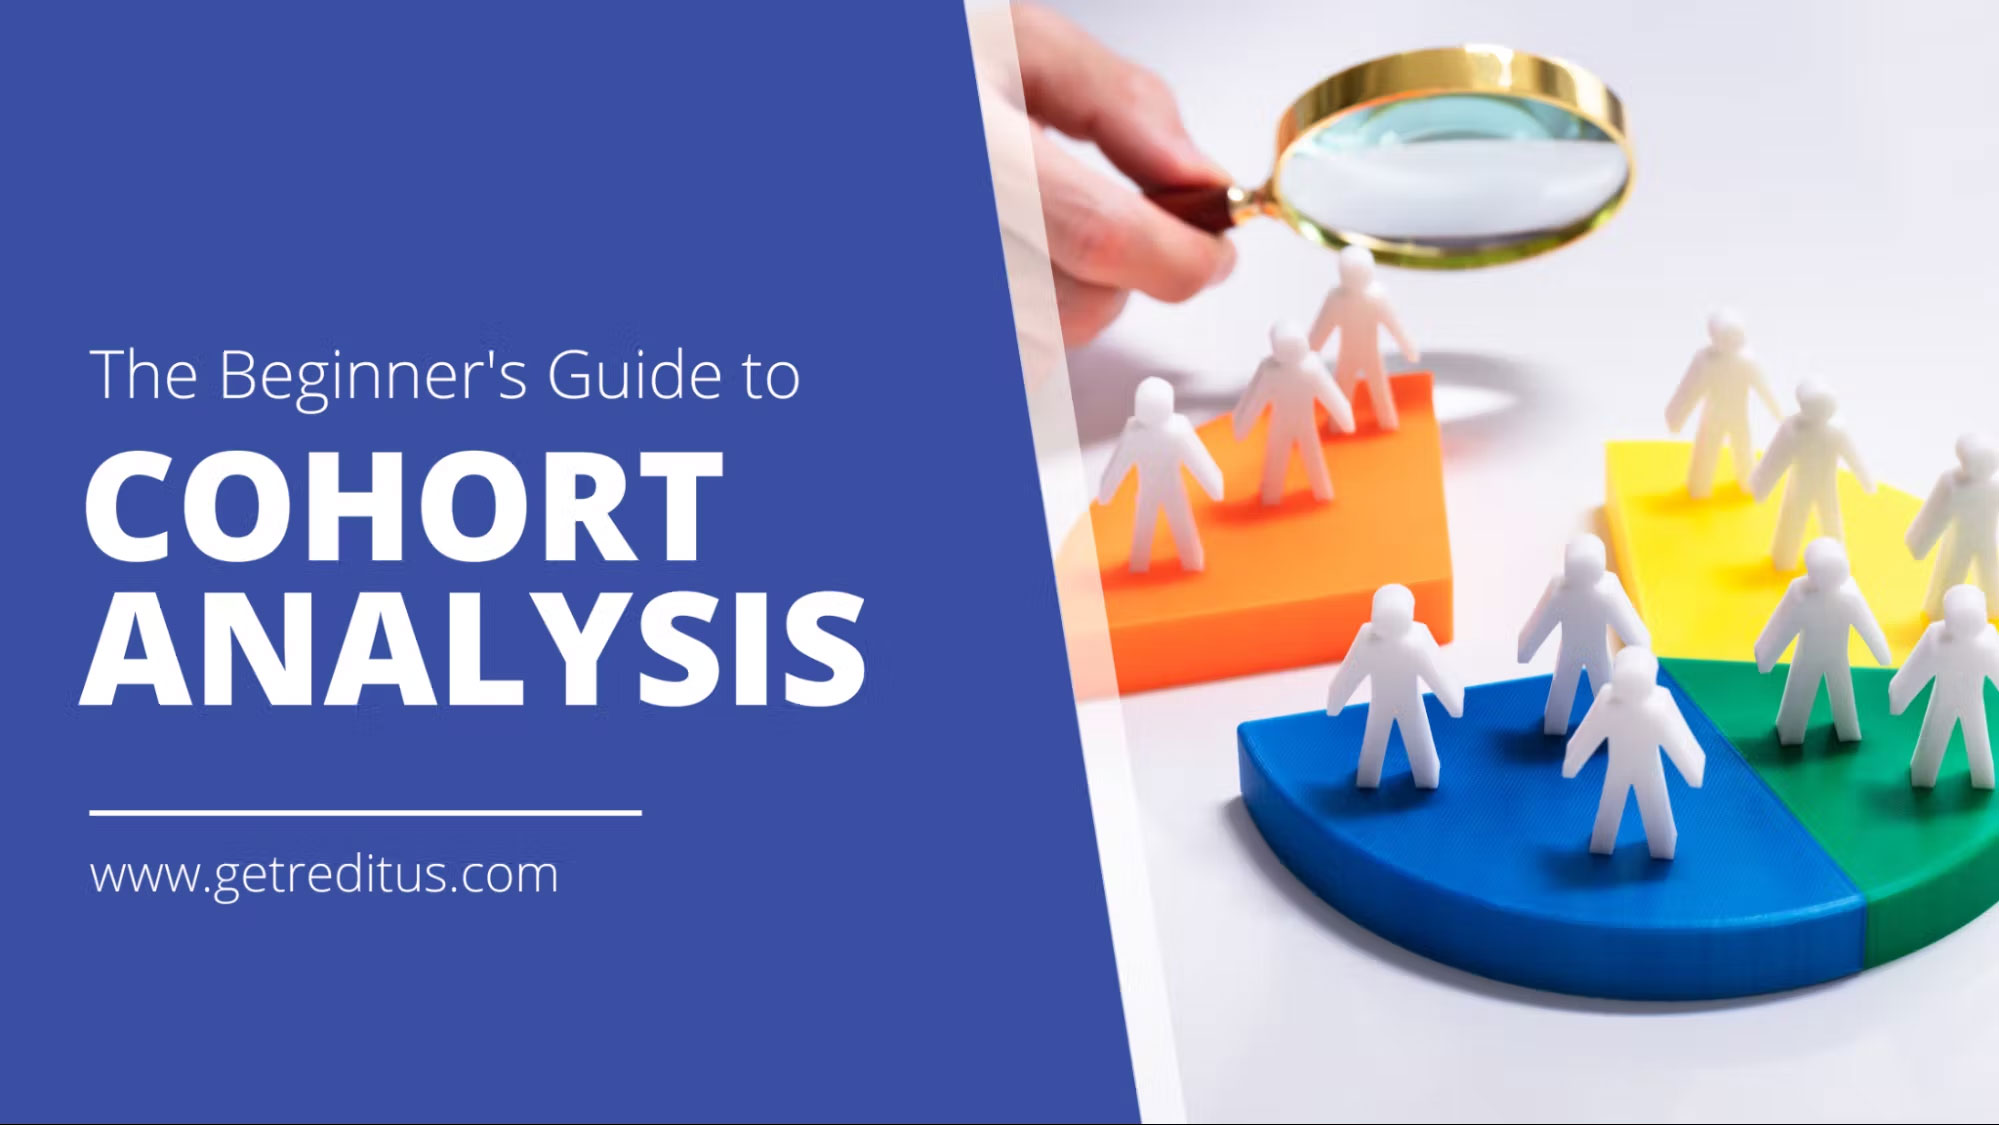 The Beginner’s Guide to Cohort Analysis